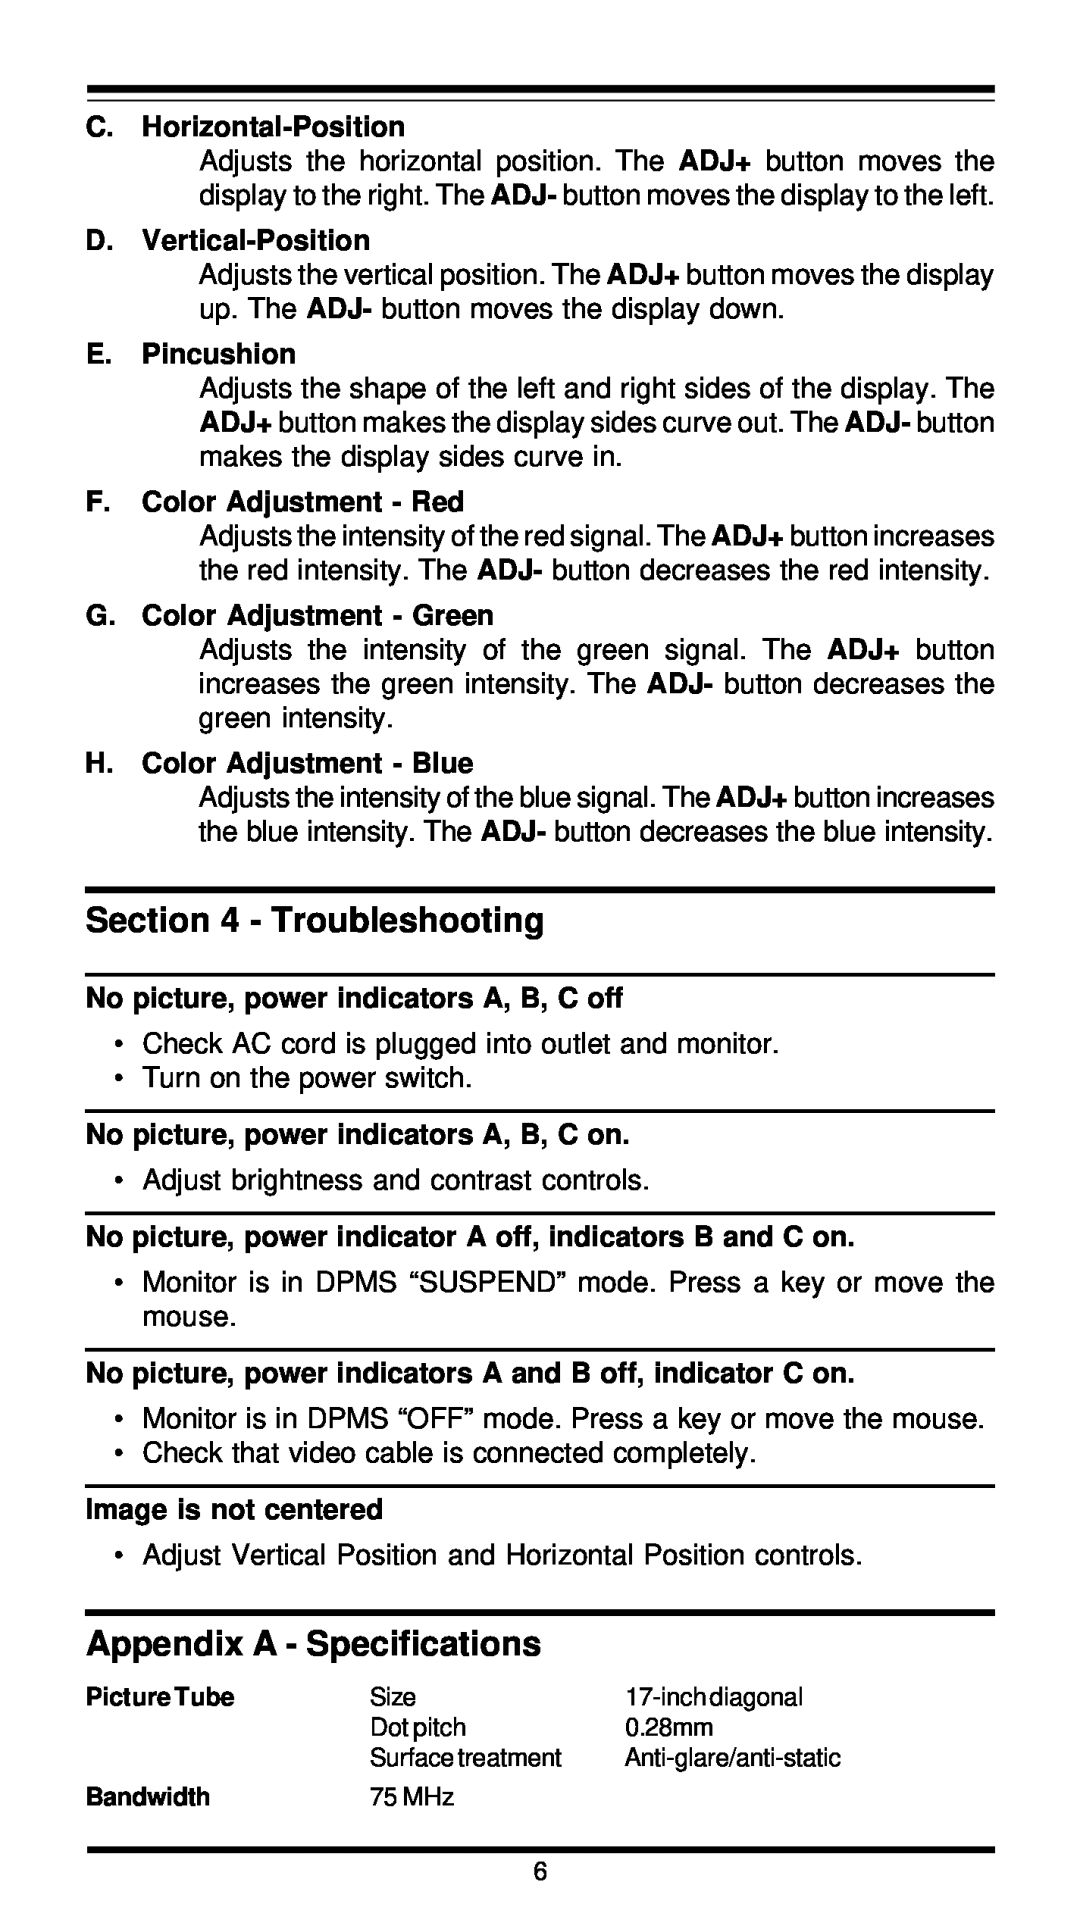 MaxTech XT7800 user manual Troubleshooting, Appendix A - Specifications 